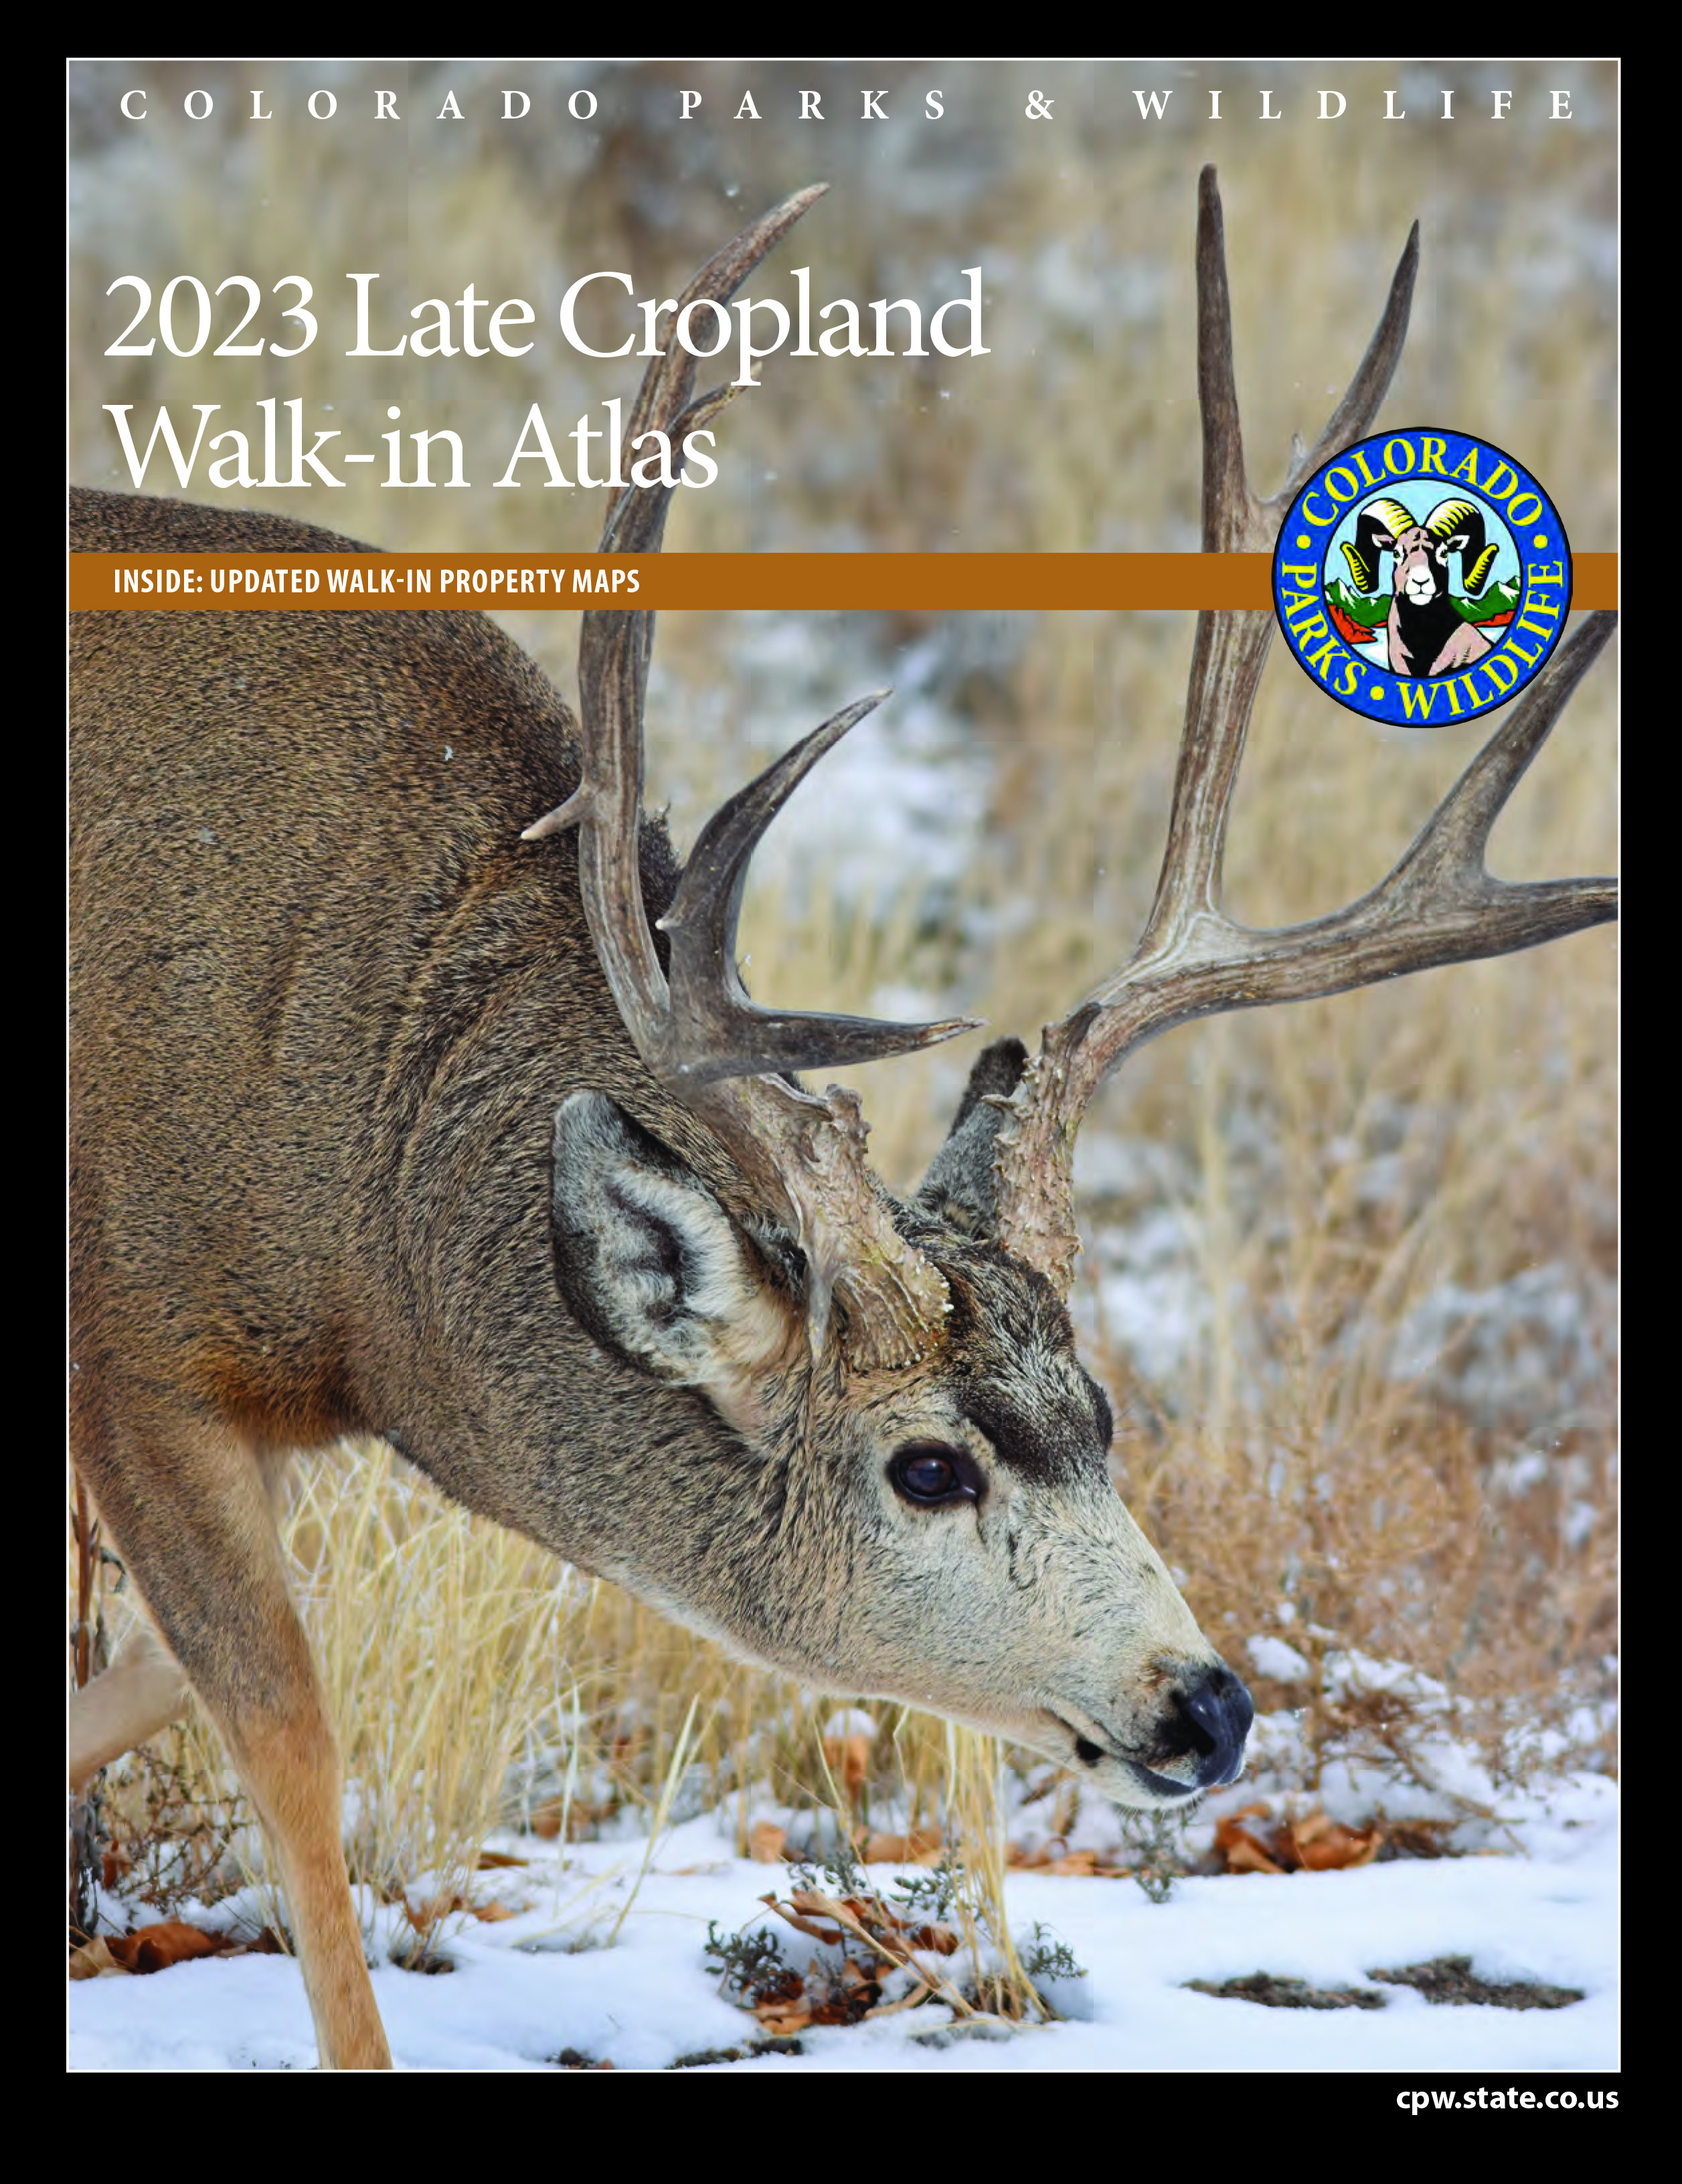 Late Cropland cover image